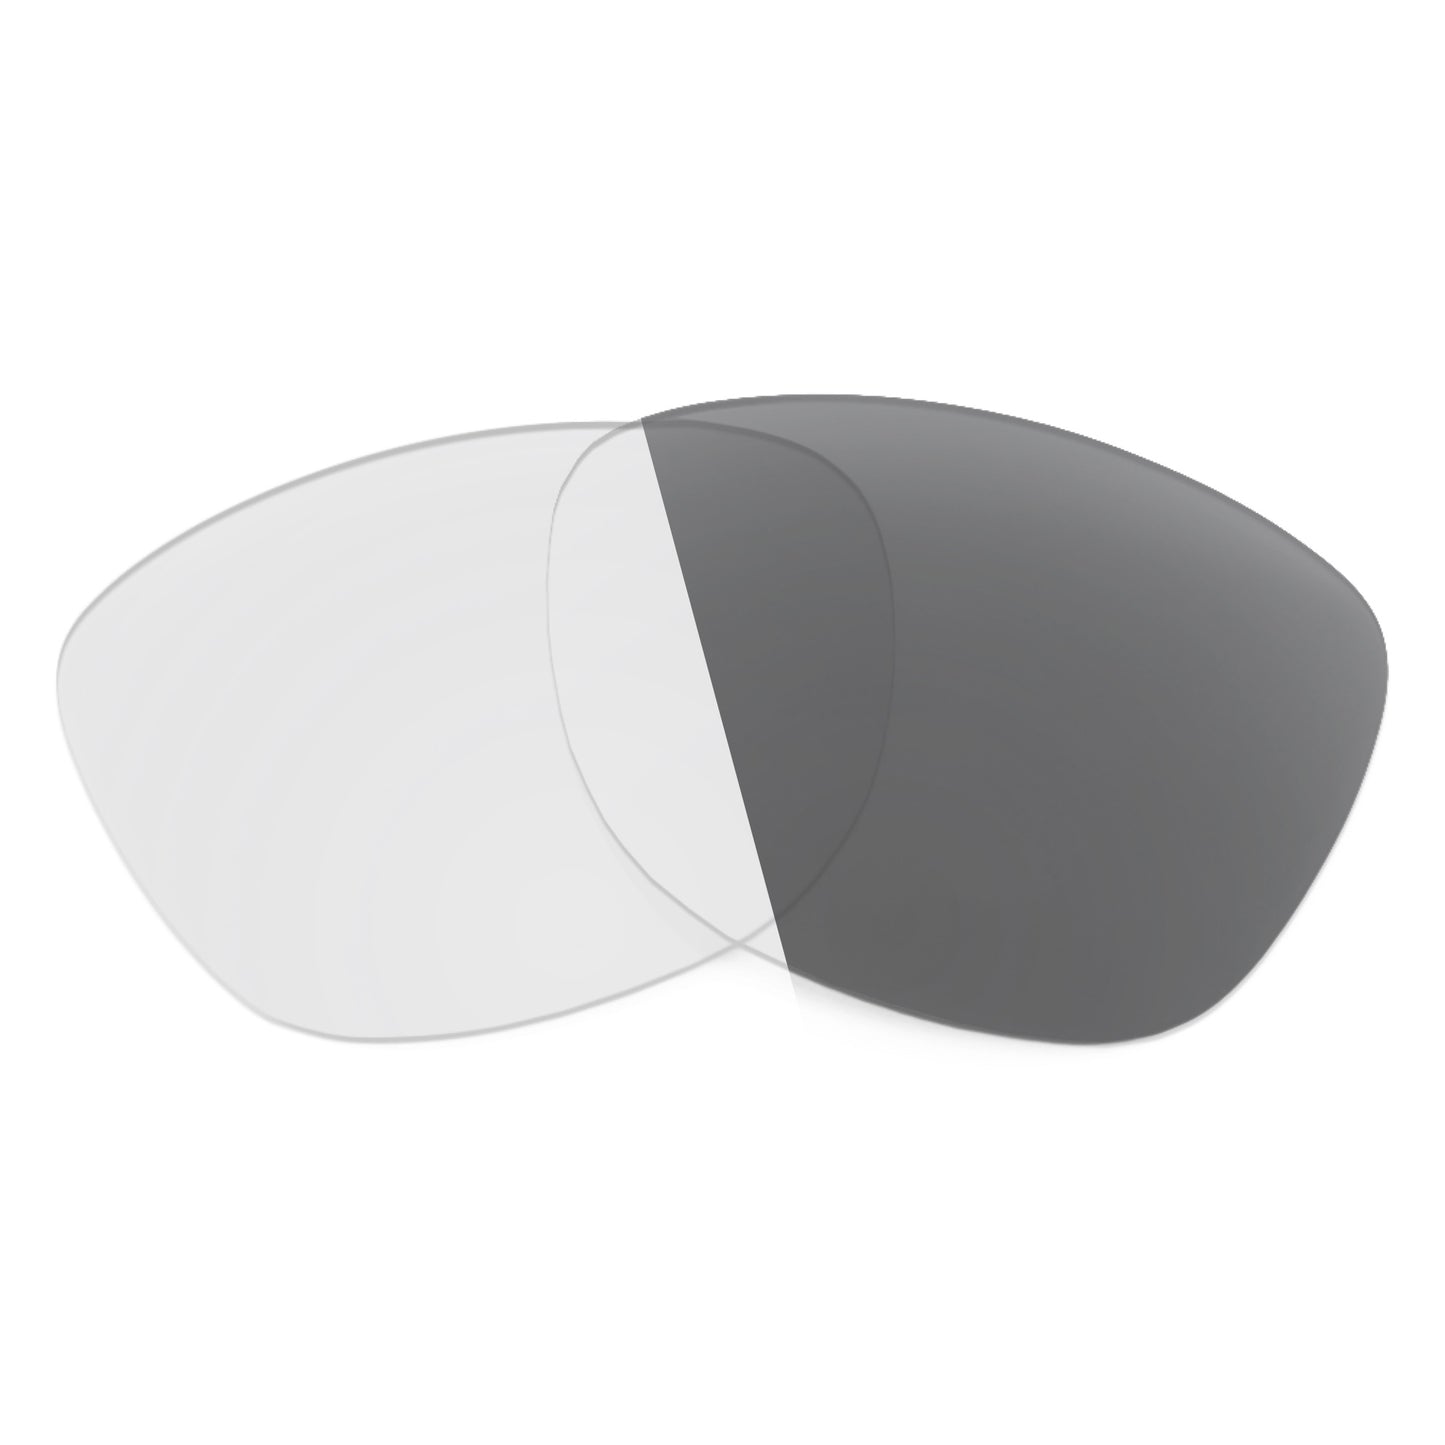 Revant replacement lenses for Ray-Ban Signet RB3429M 58mm Non-Polarized Adapt Gray Photochromic